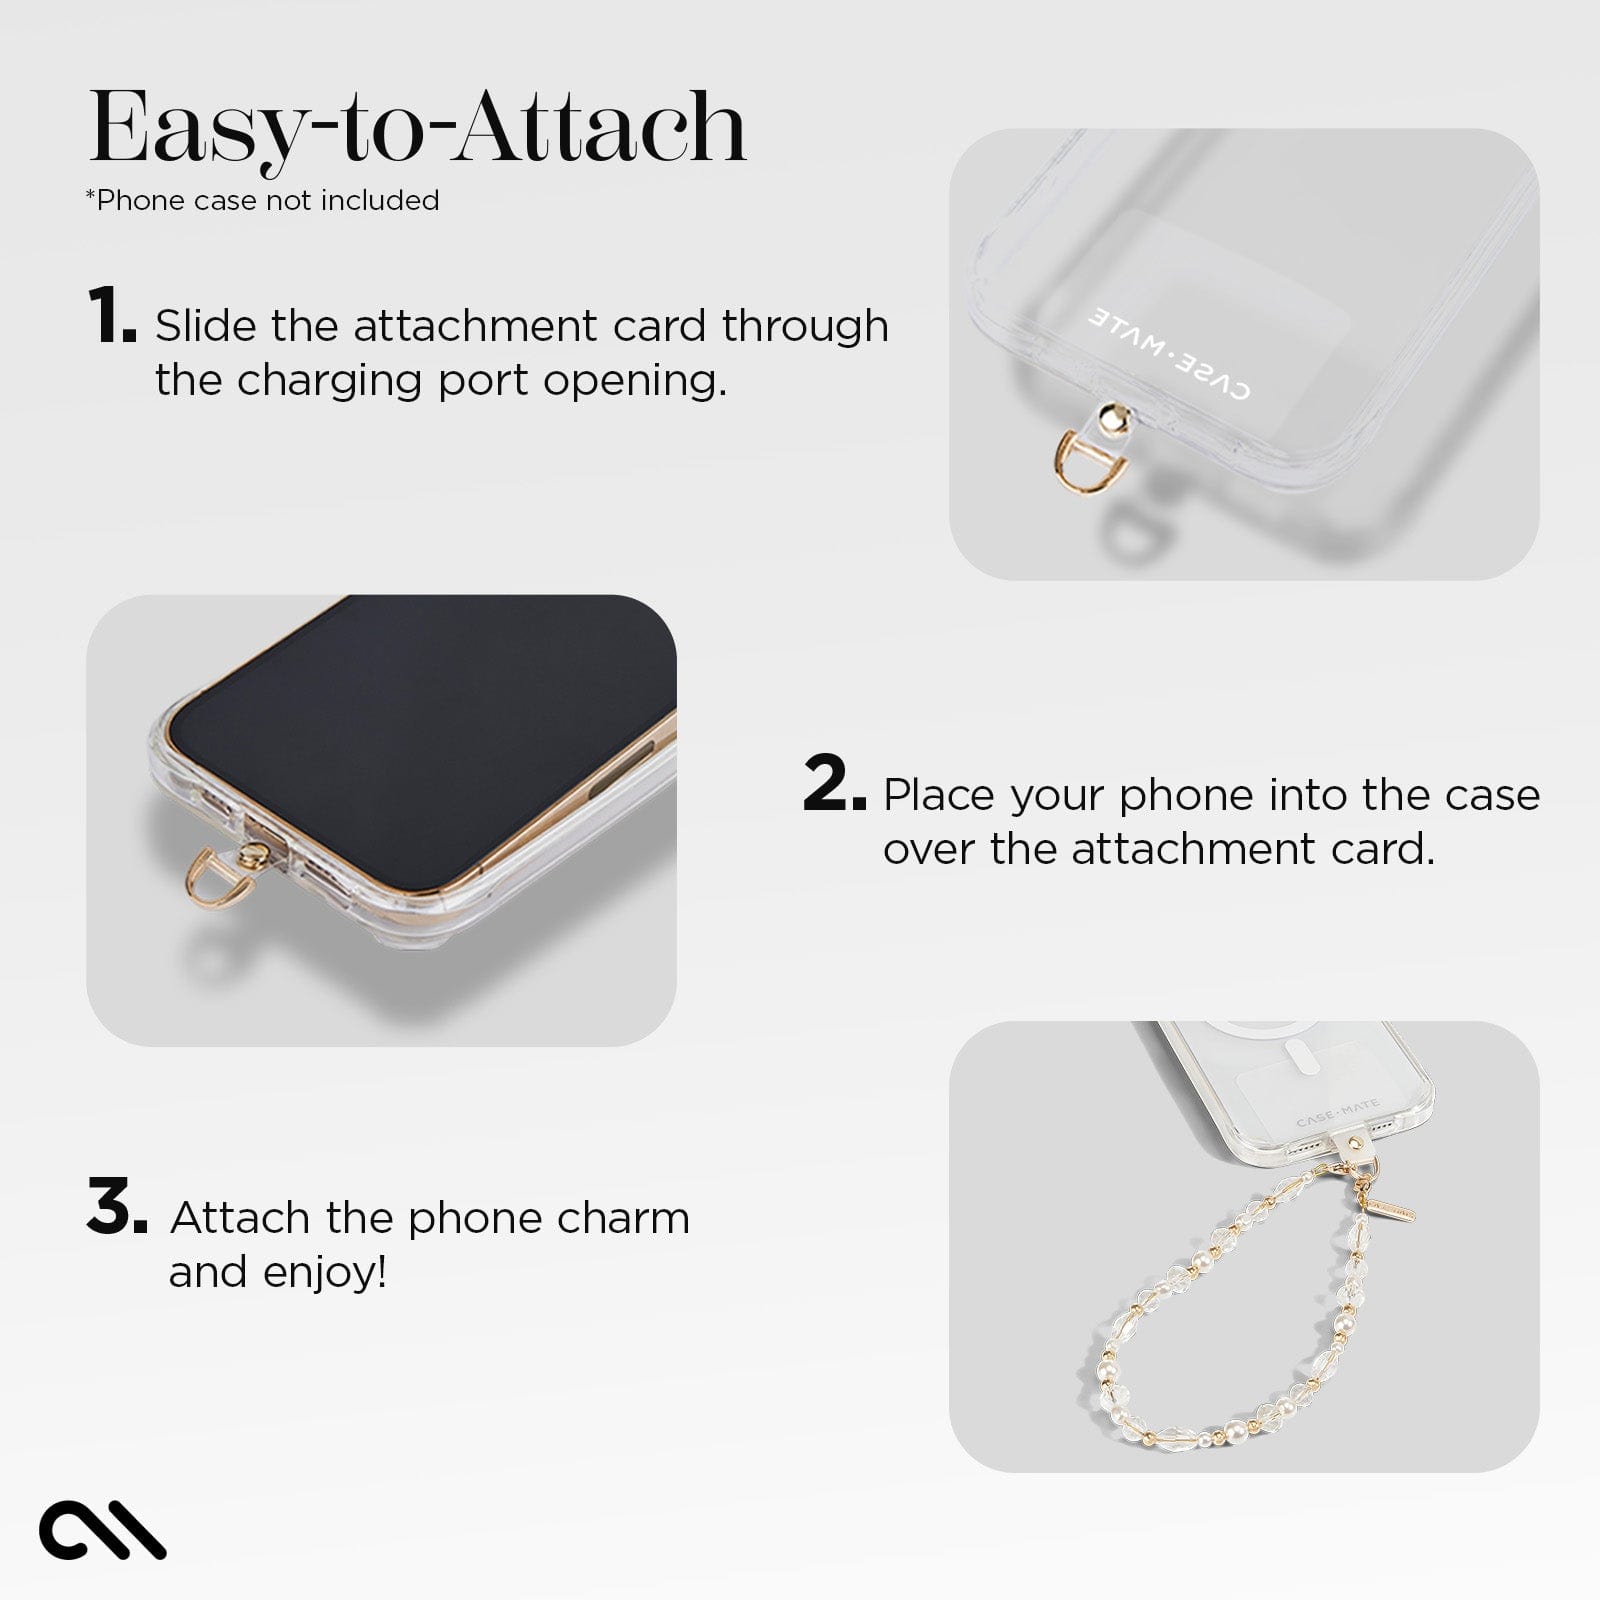 EASY-TO-ATTACH. 1. SLIDE THE ATTACHMENT CARD THROUGH THE CHARGING PORT OPENING. 2. PLACE YOUR PHONE INTO THE CASE OVER THE ATTACHMENT CARD. 3. ATTACH THE PHONE CHARM AND ENJOY!